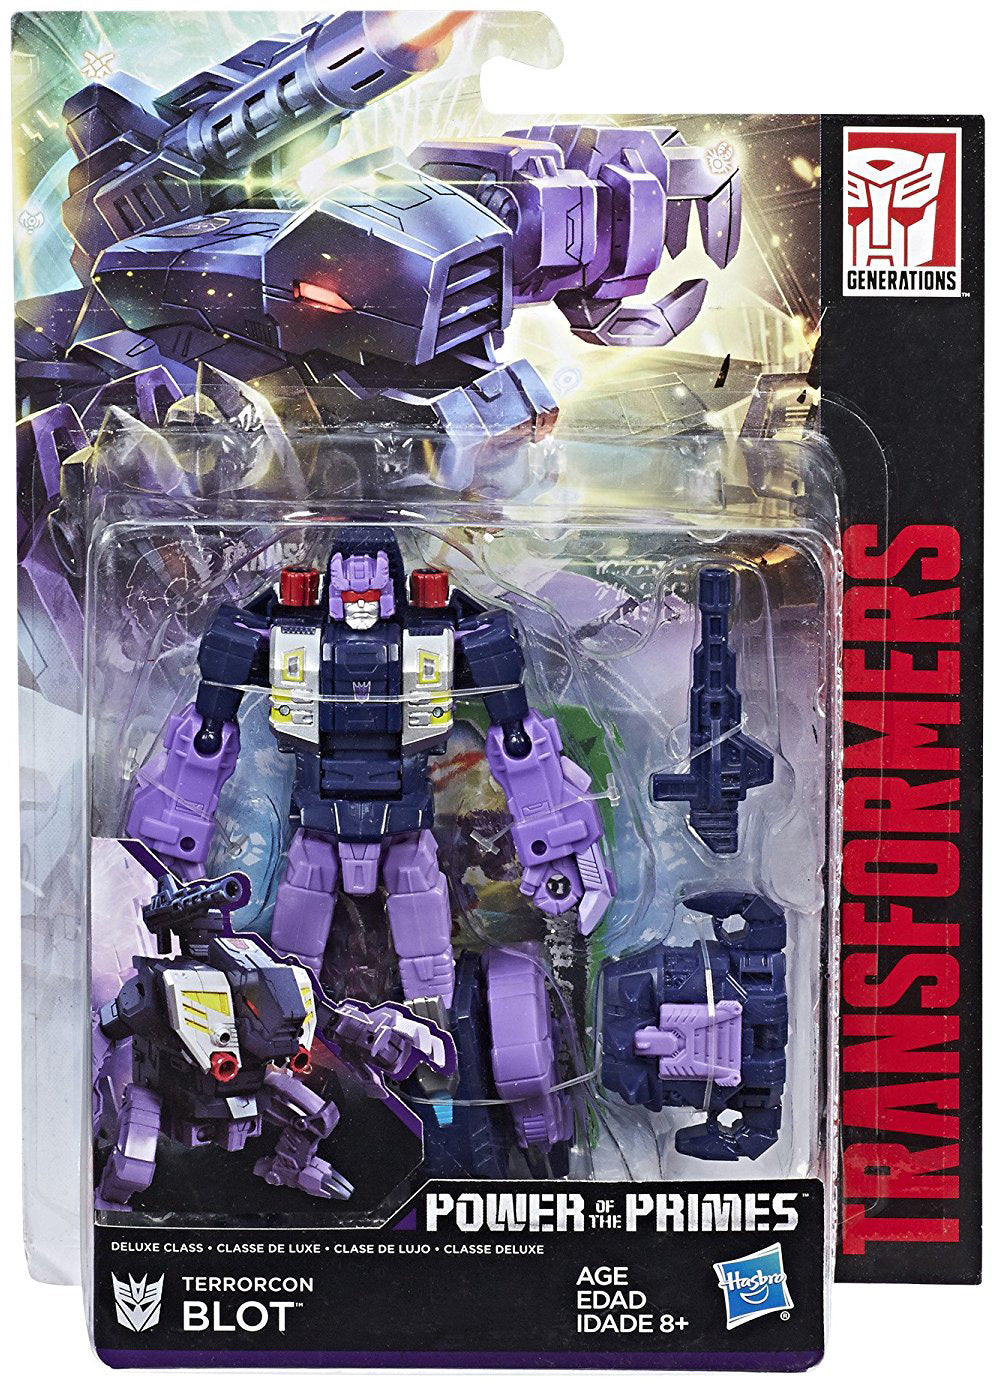 Transformers Power Of The Primes 6 Inch Action Figure Deluxe Class - Blot